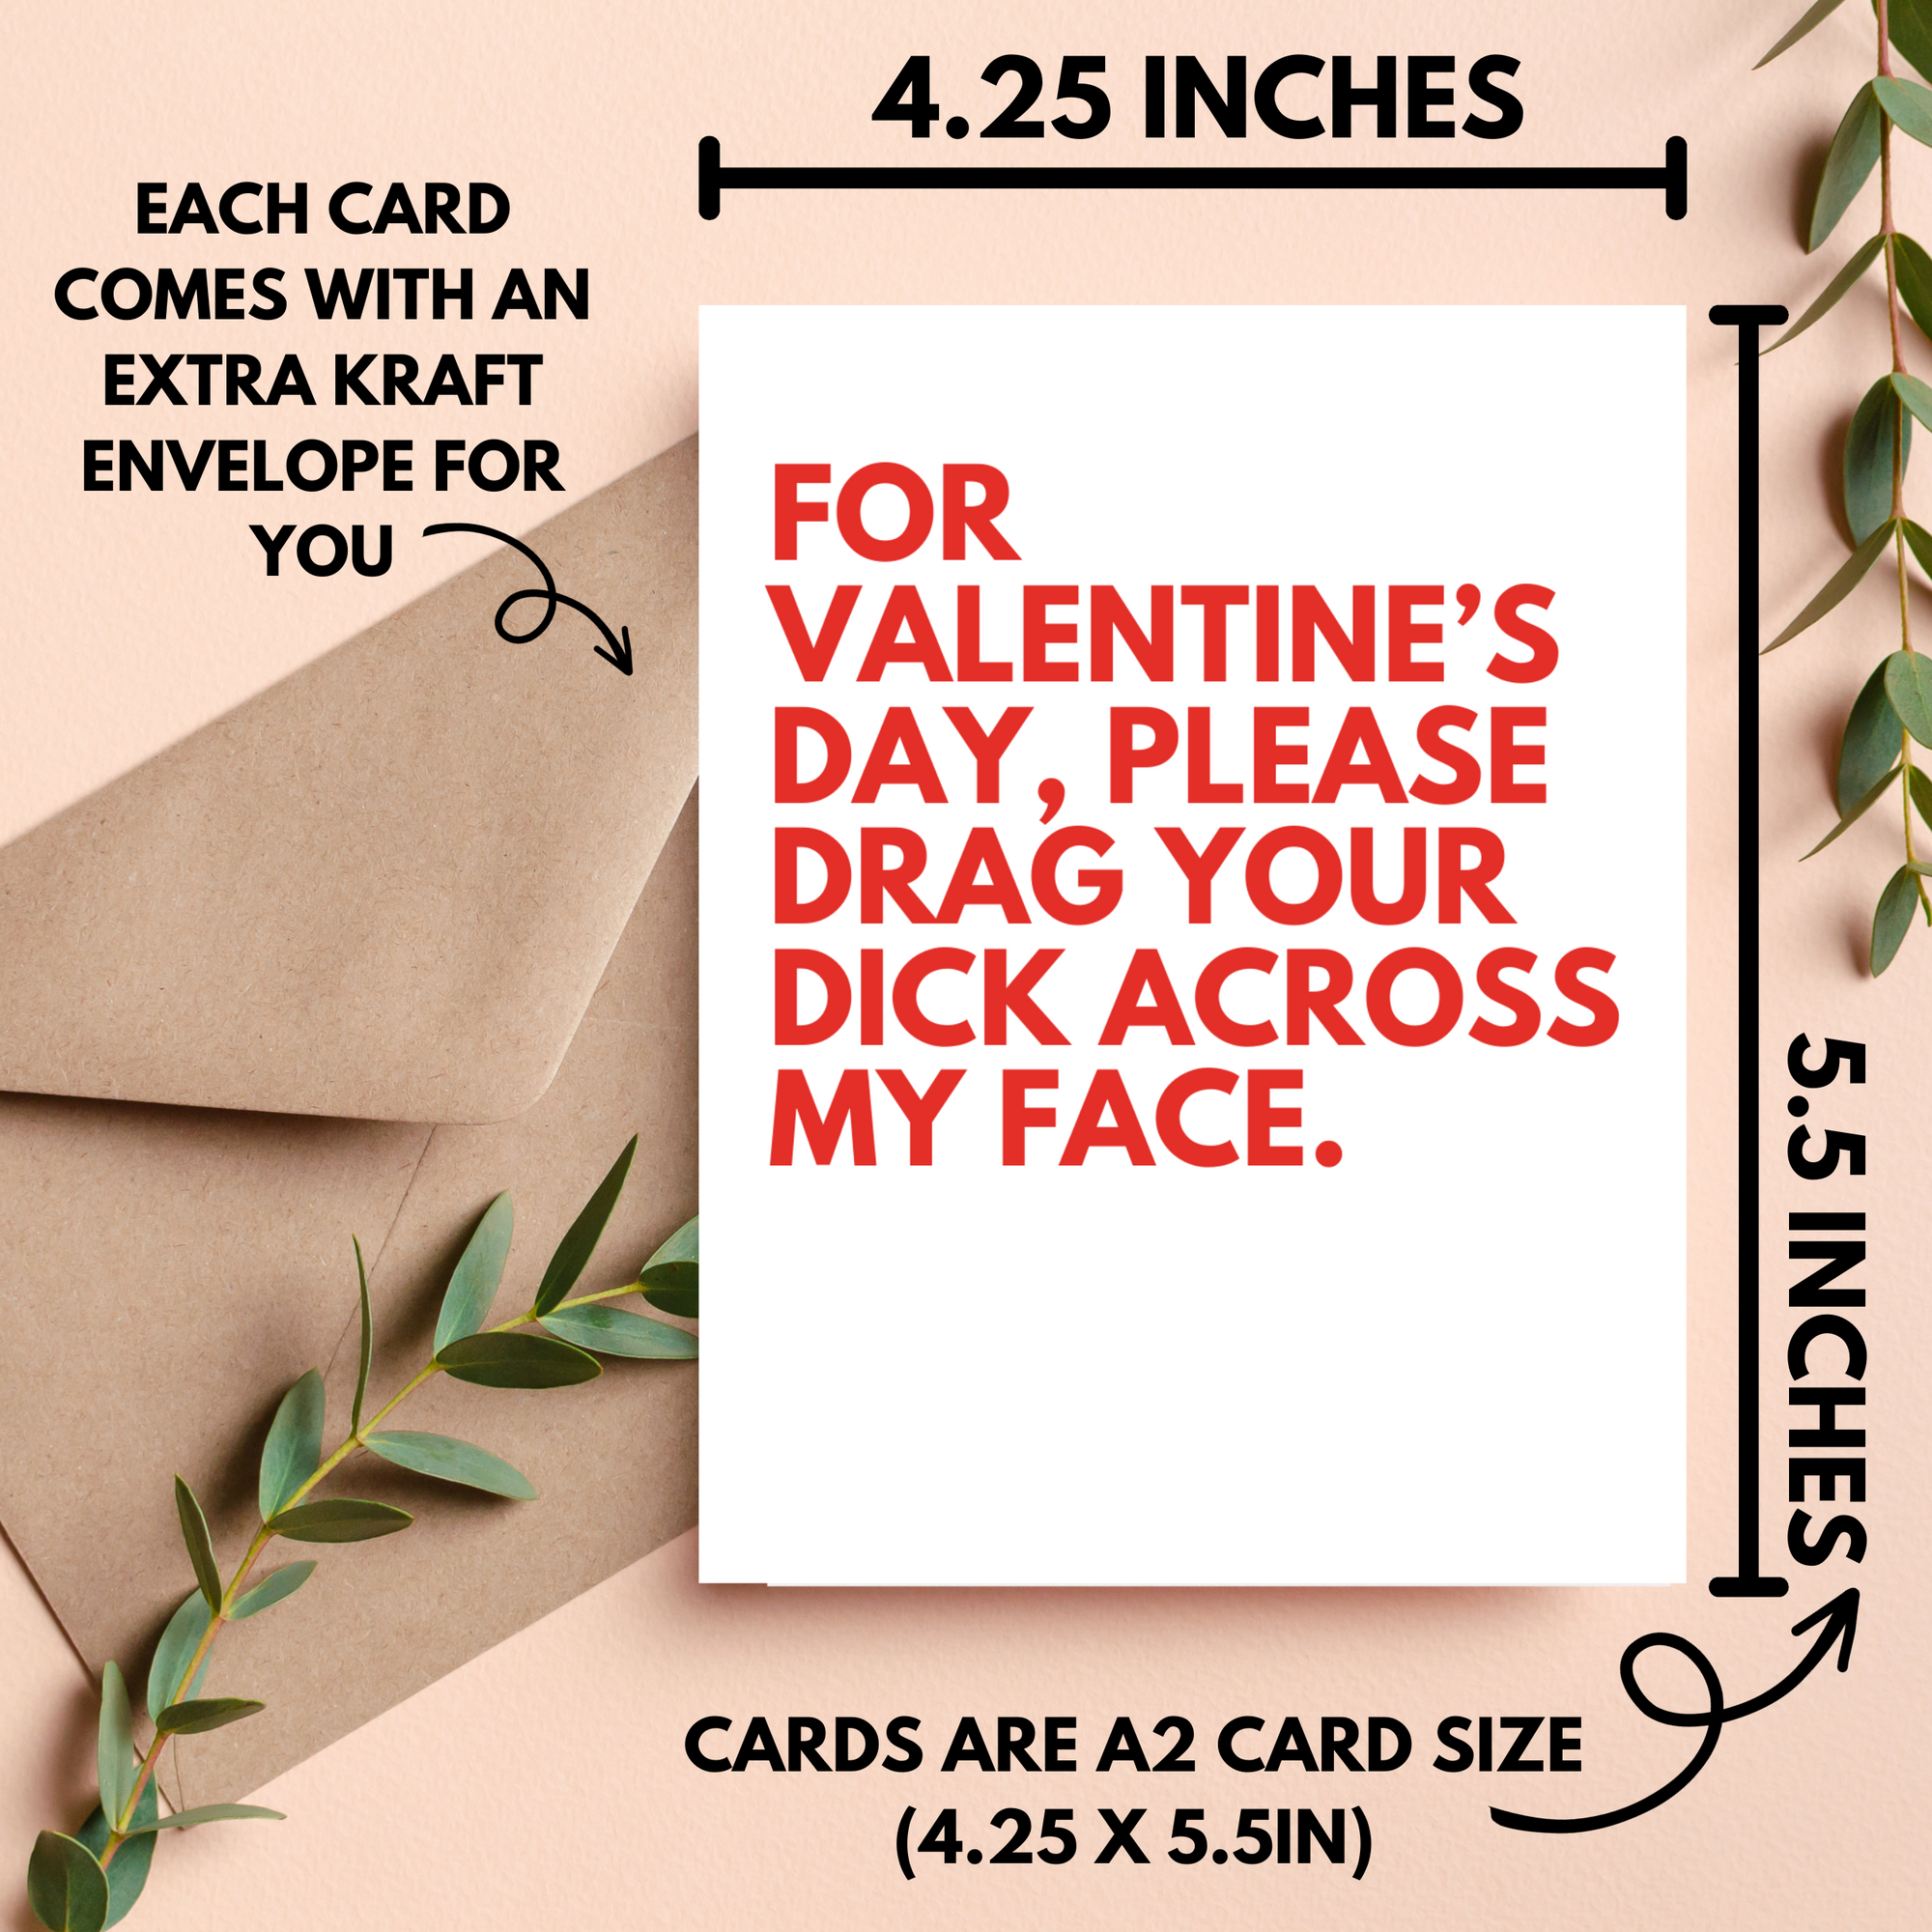 Your Valentine's Day Fantasy Card for Him